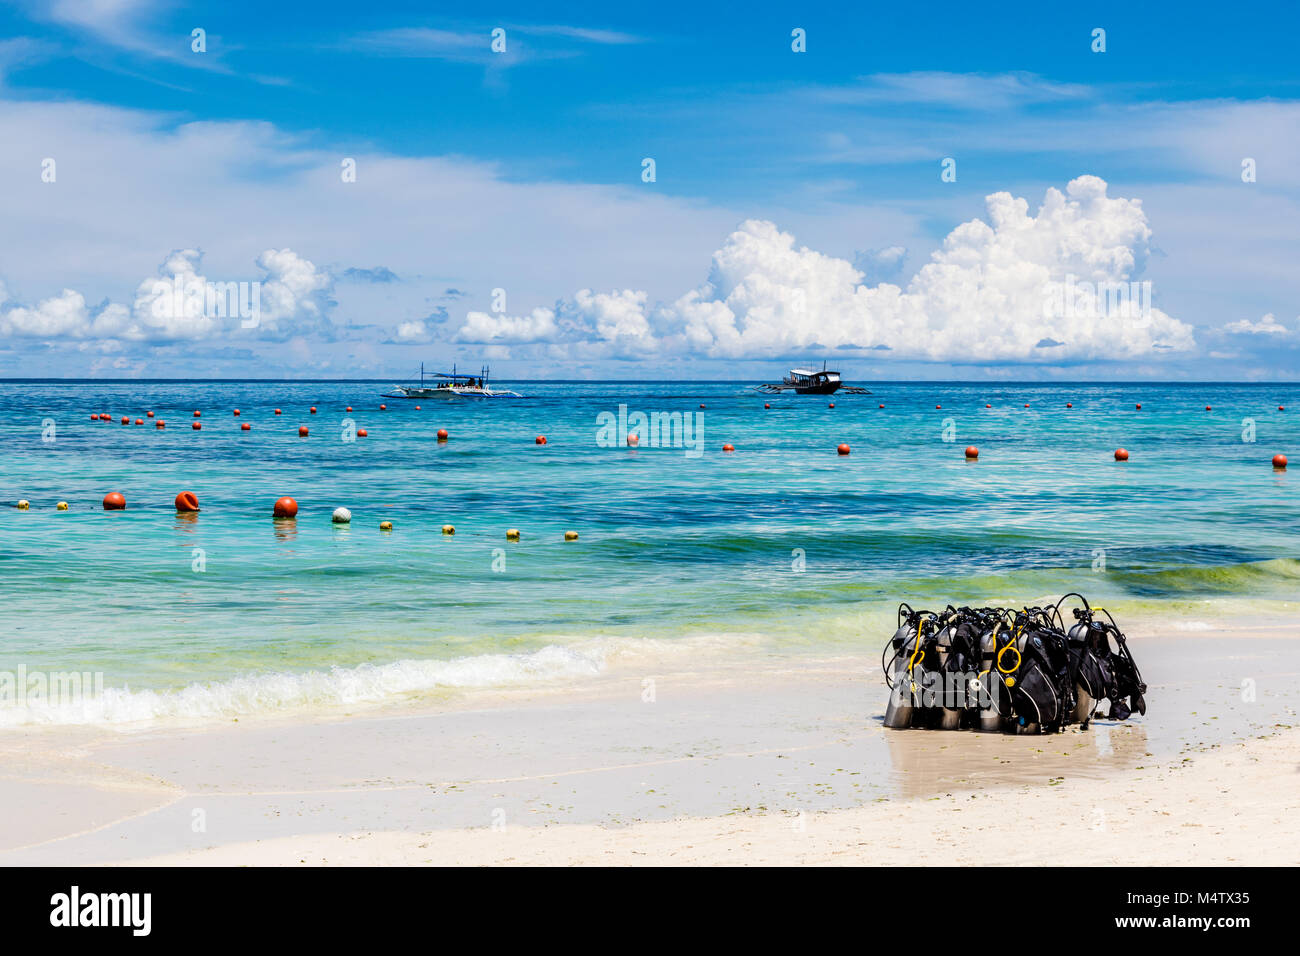 Scuba diving gear laying on the sand on White Beach, Boracay Island, Philippines Stock Photo